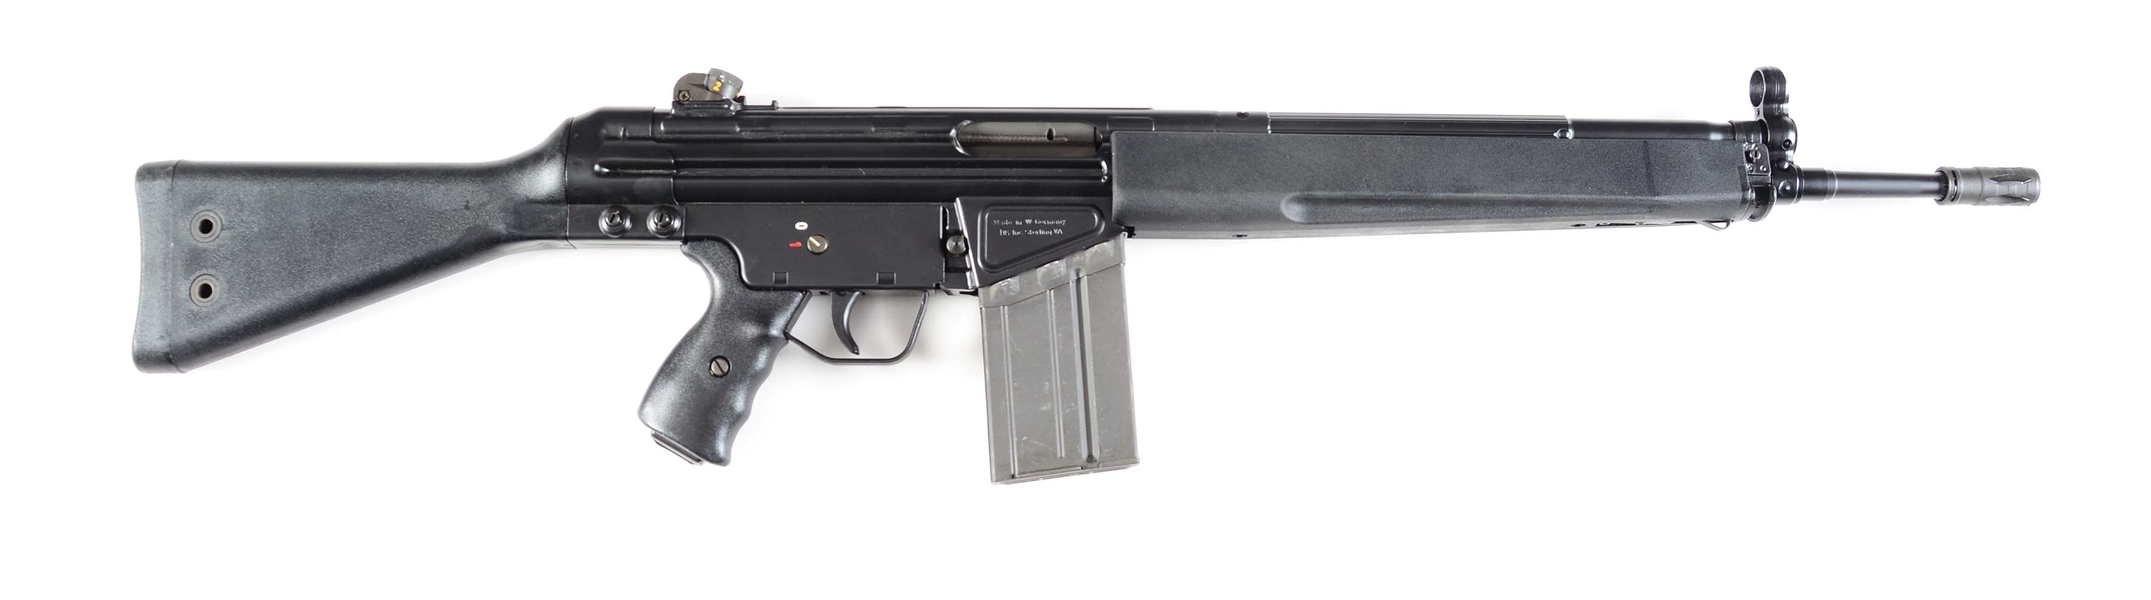 (M) HECKLER AND KOCH MODEL 91A2 SEMI-AUTOMATIC RIFLE.